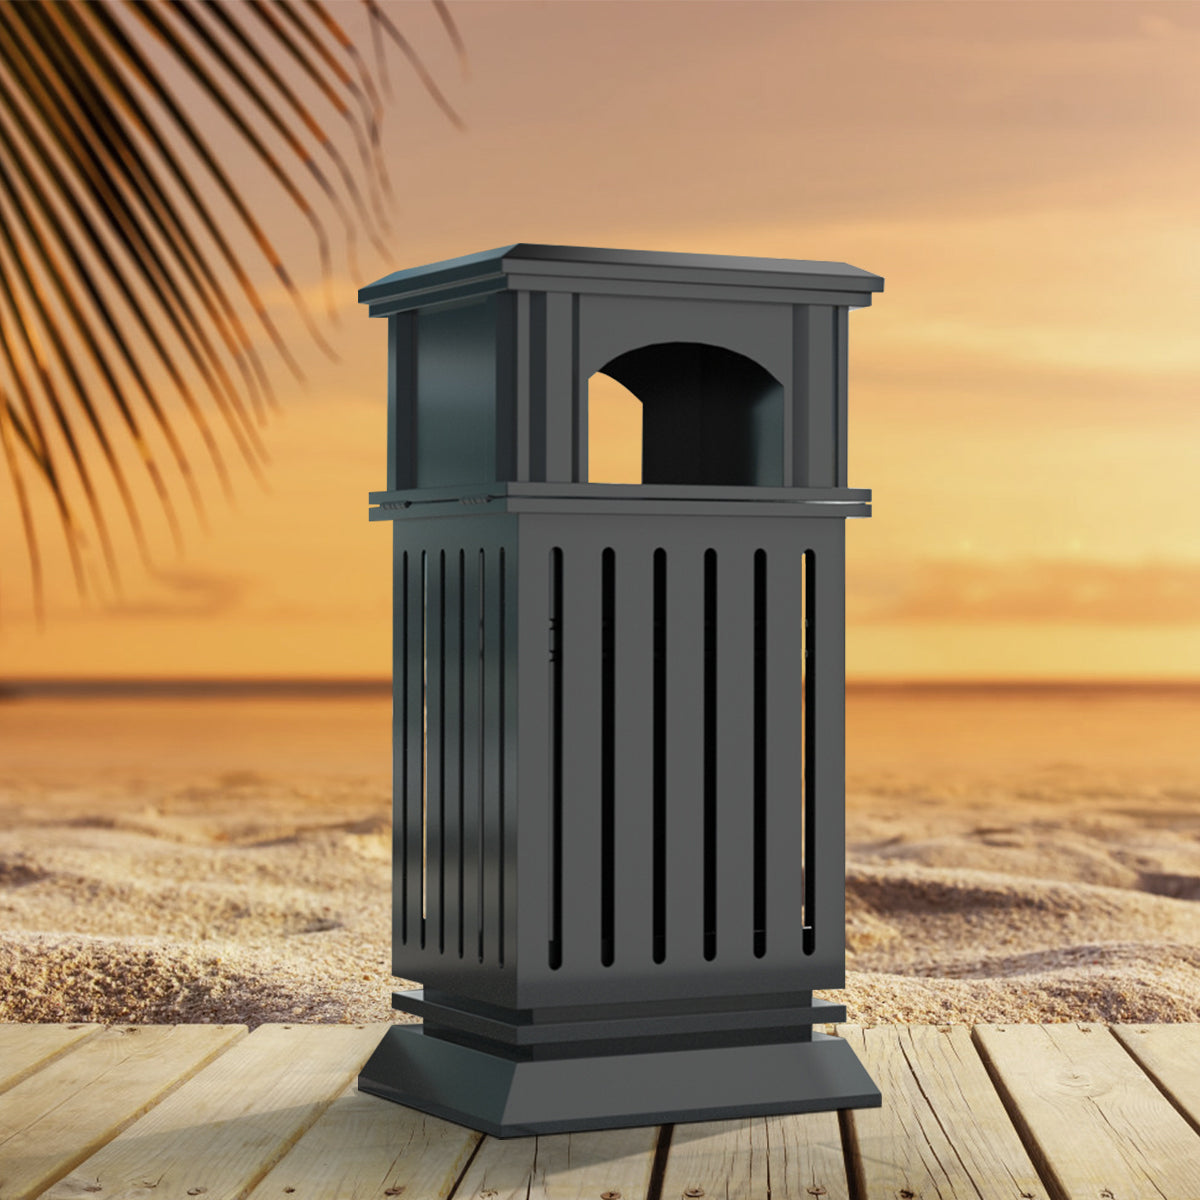 BEAMNOVA 15.4 * 34.3 in Black + 12.4 * 27 in Black Outdoor Trash Can with  Lid Stainless Steel Commercial Garbage Enclosure Yard Garage Industrial